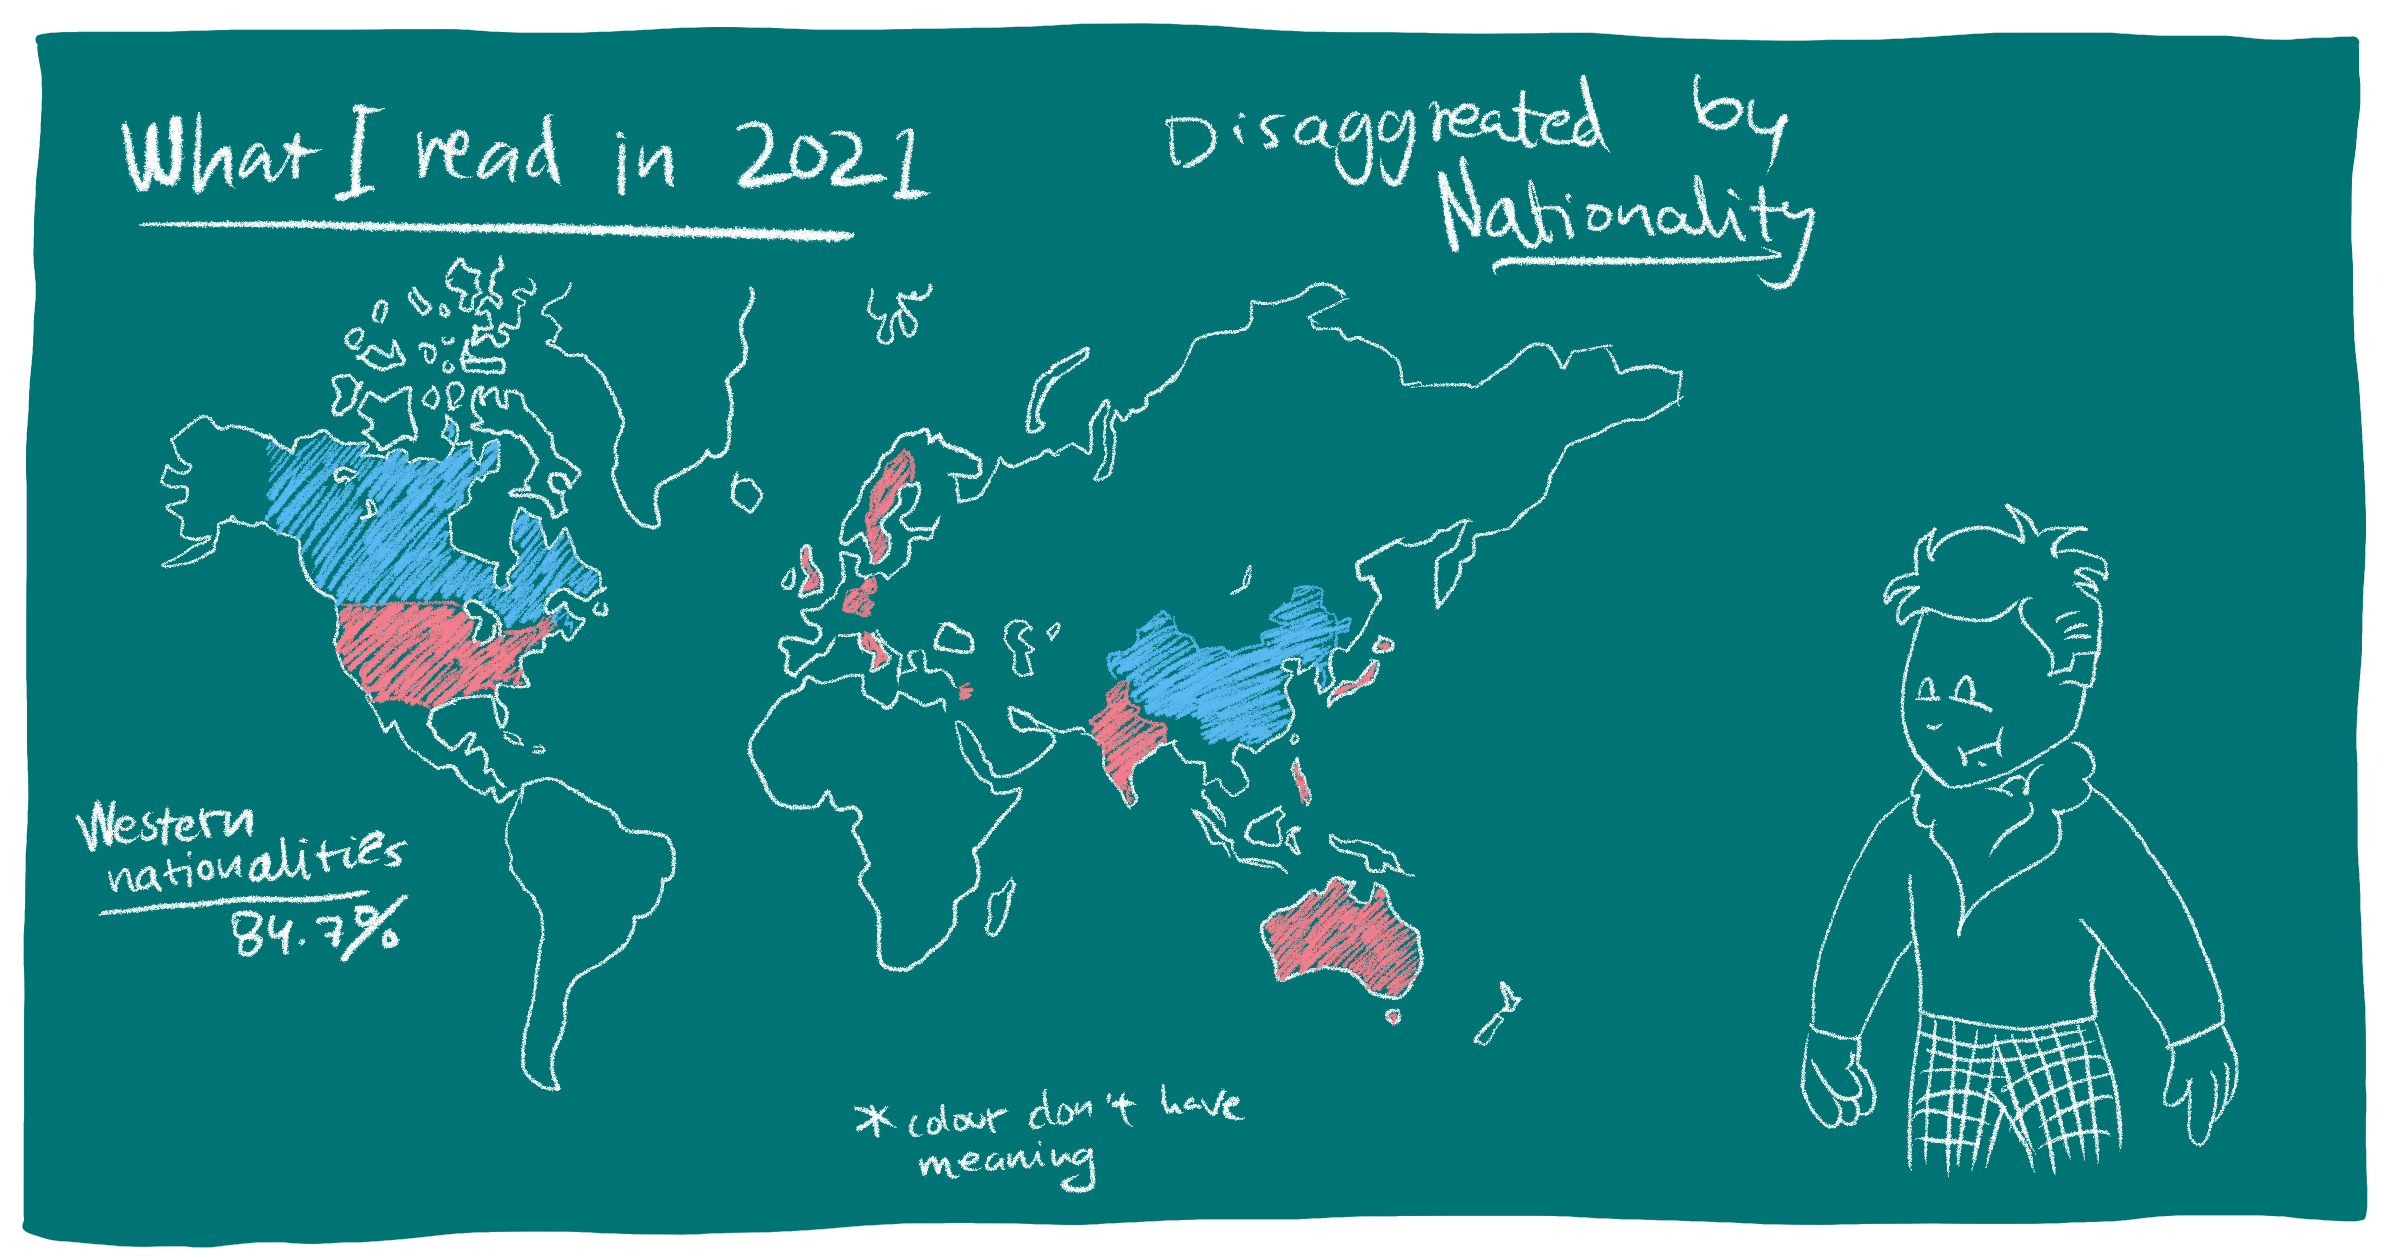 Chalkboard depicting a pie chart of the split disaggregated by nationality with drawing of Disney Carlos in a corner looking speechless.